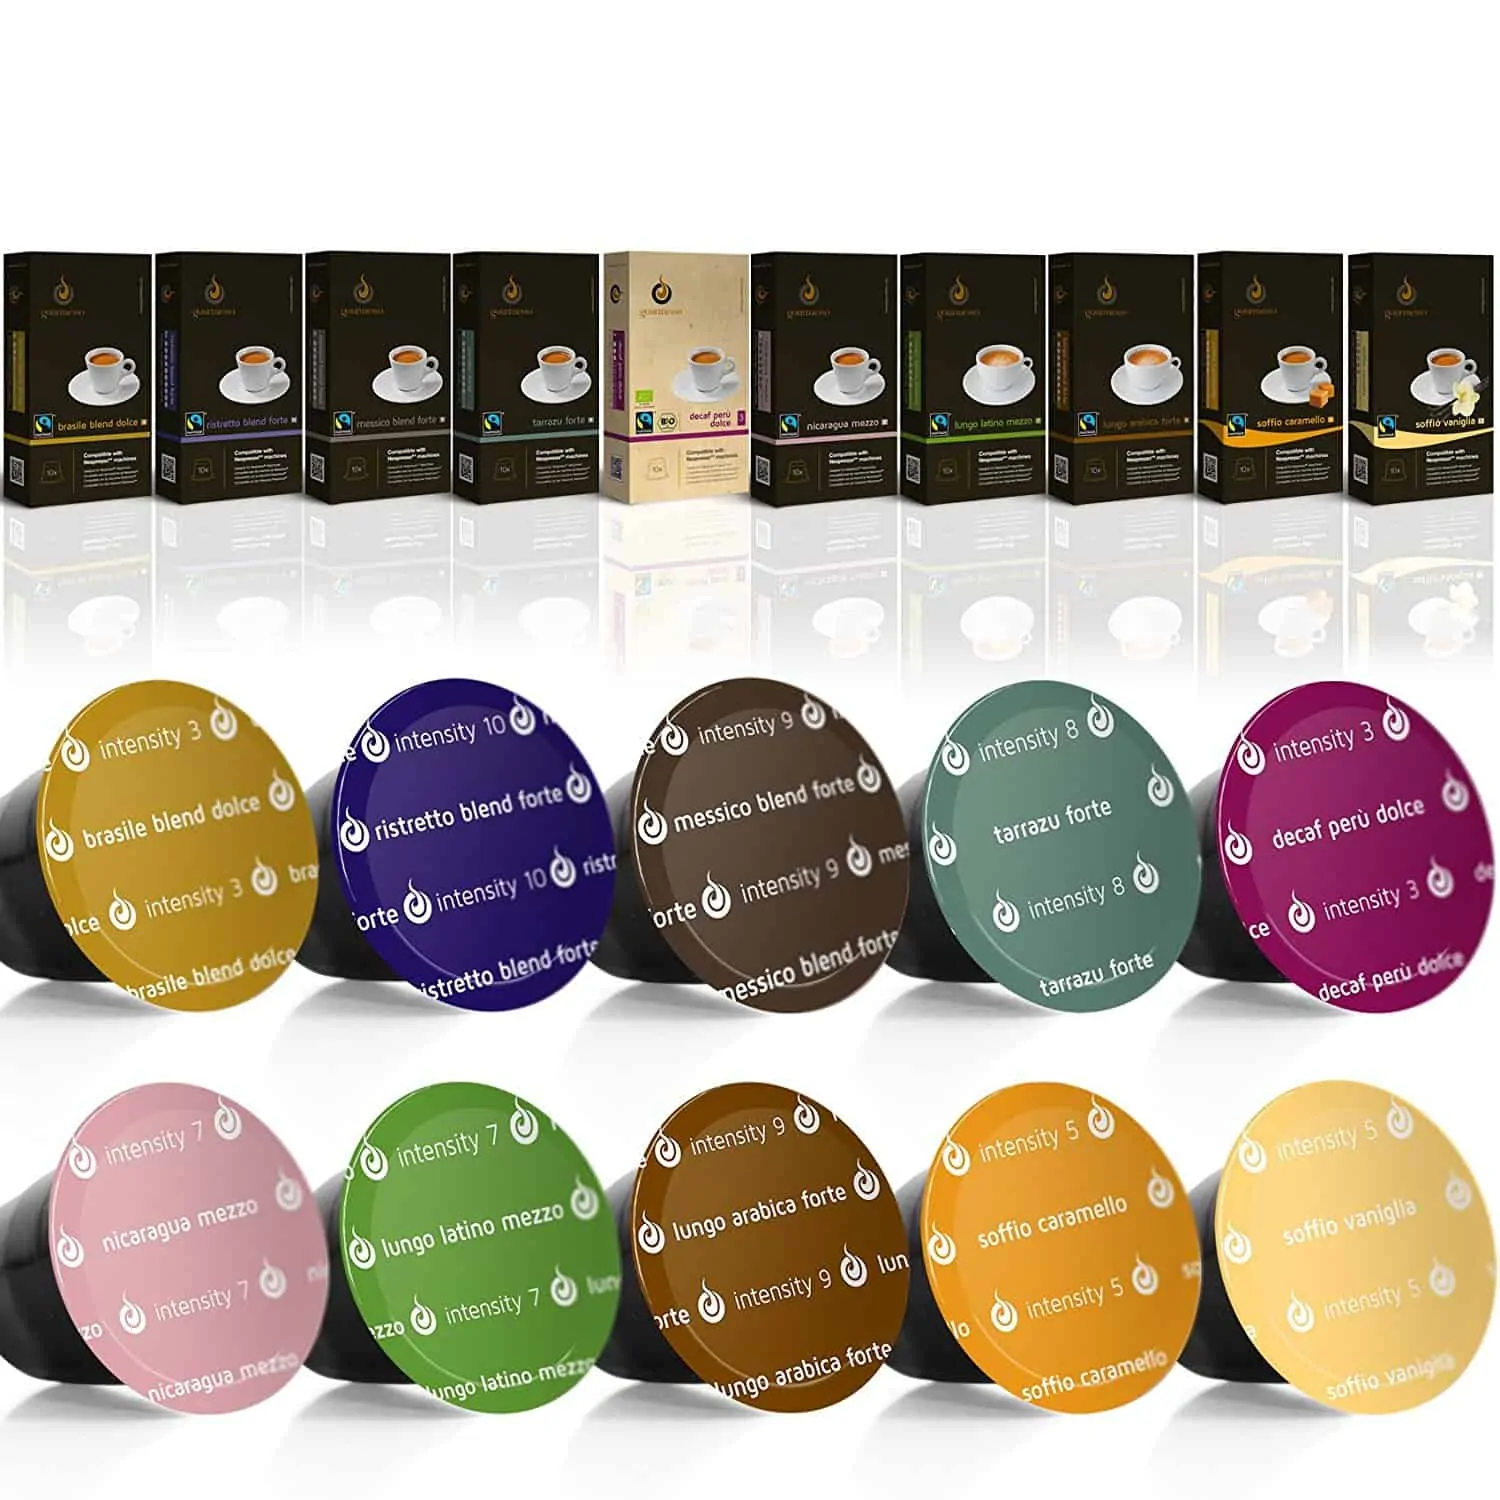 Review: Nespresso compatible coffeee capsules by Gourmesso (Update)